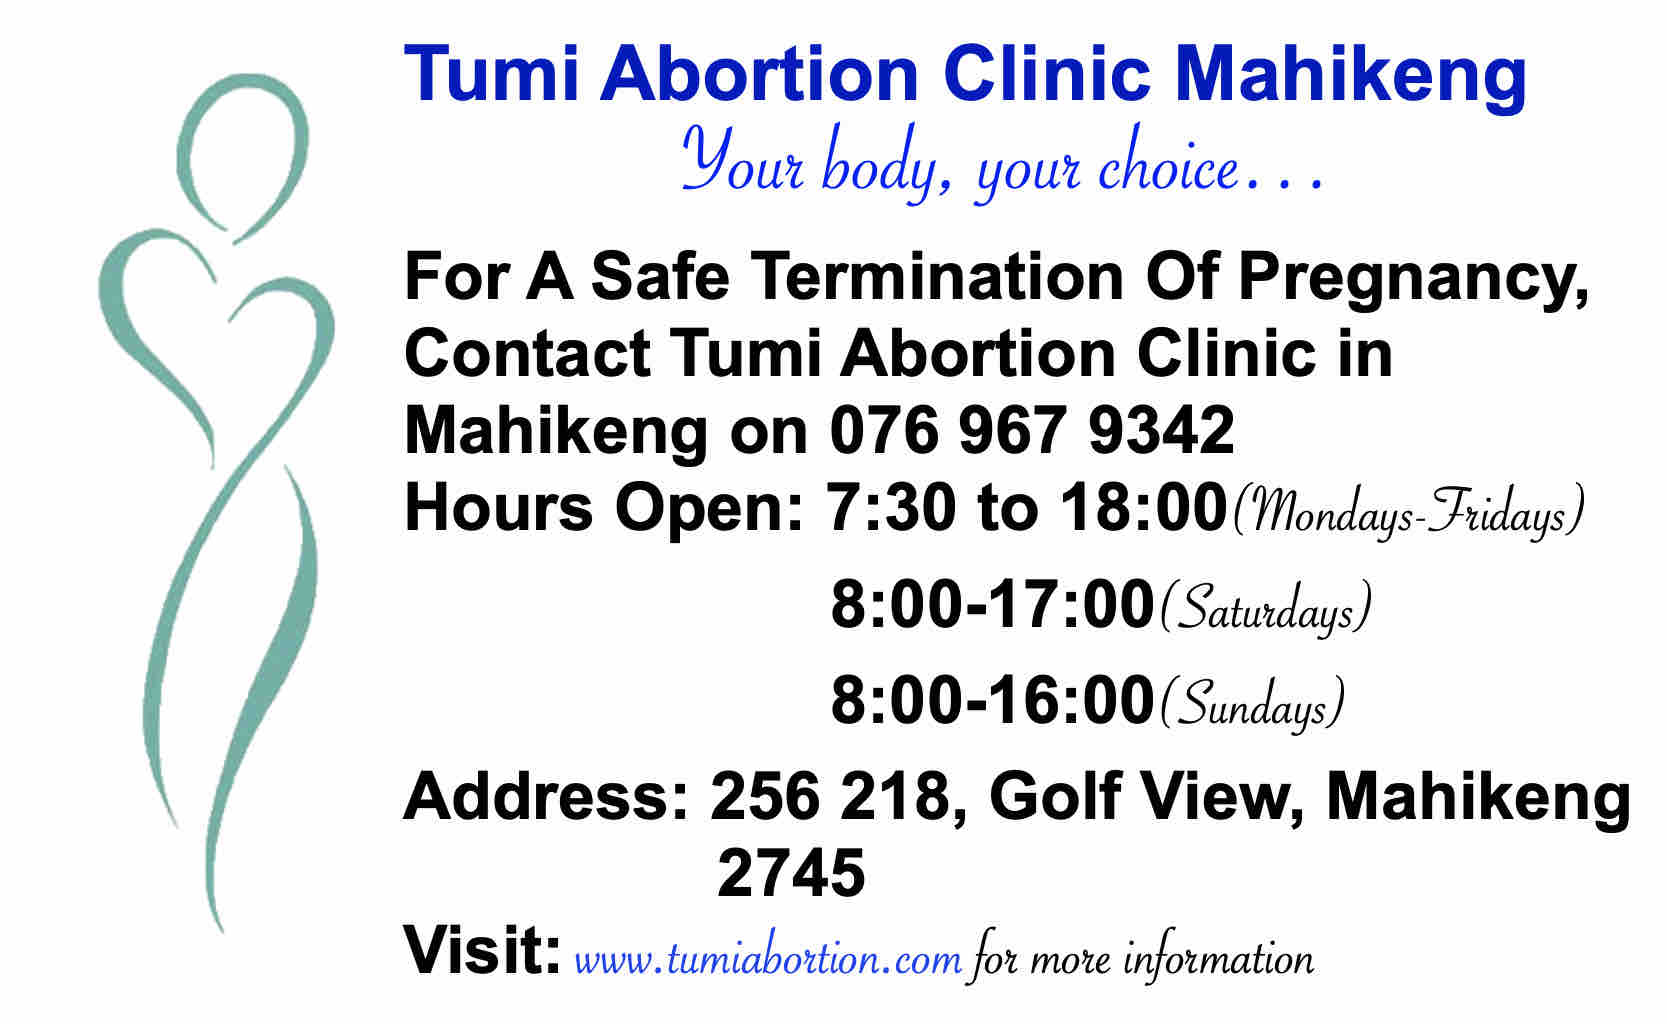 Abortion clinic in Mahikeng